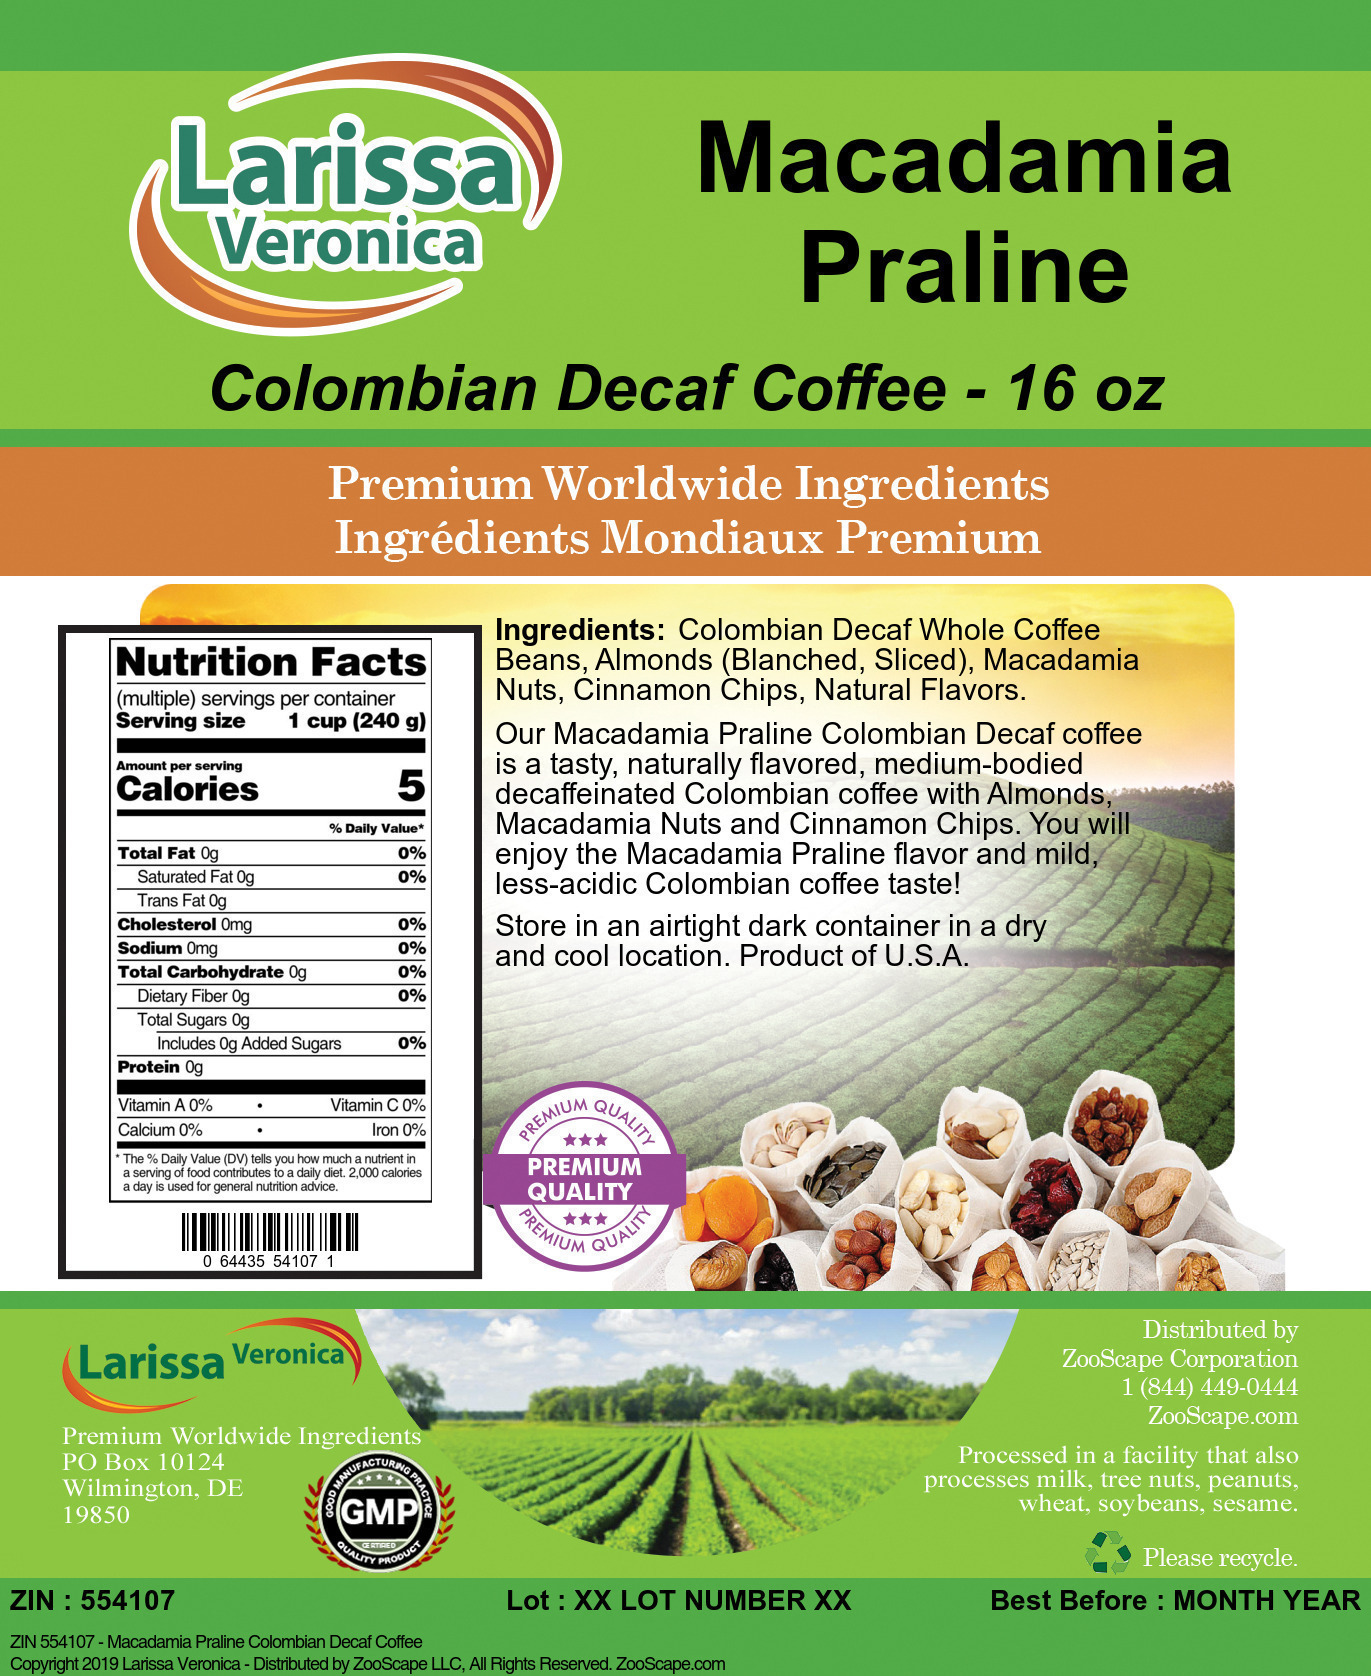 Macadamia Praline Colombian Decaf Coffee - Label